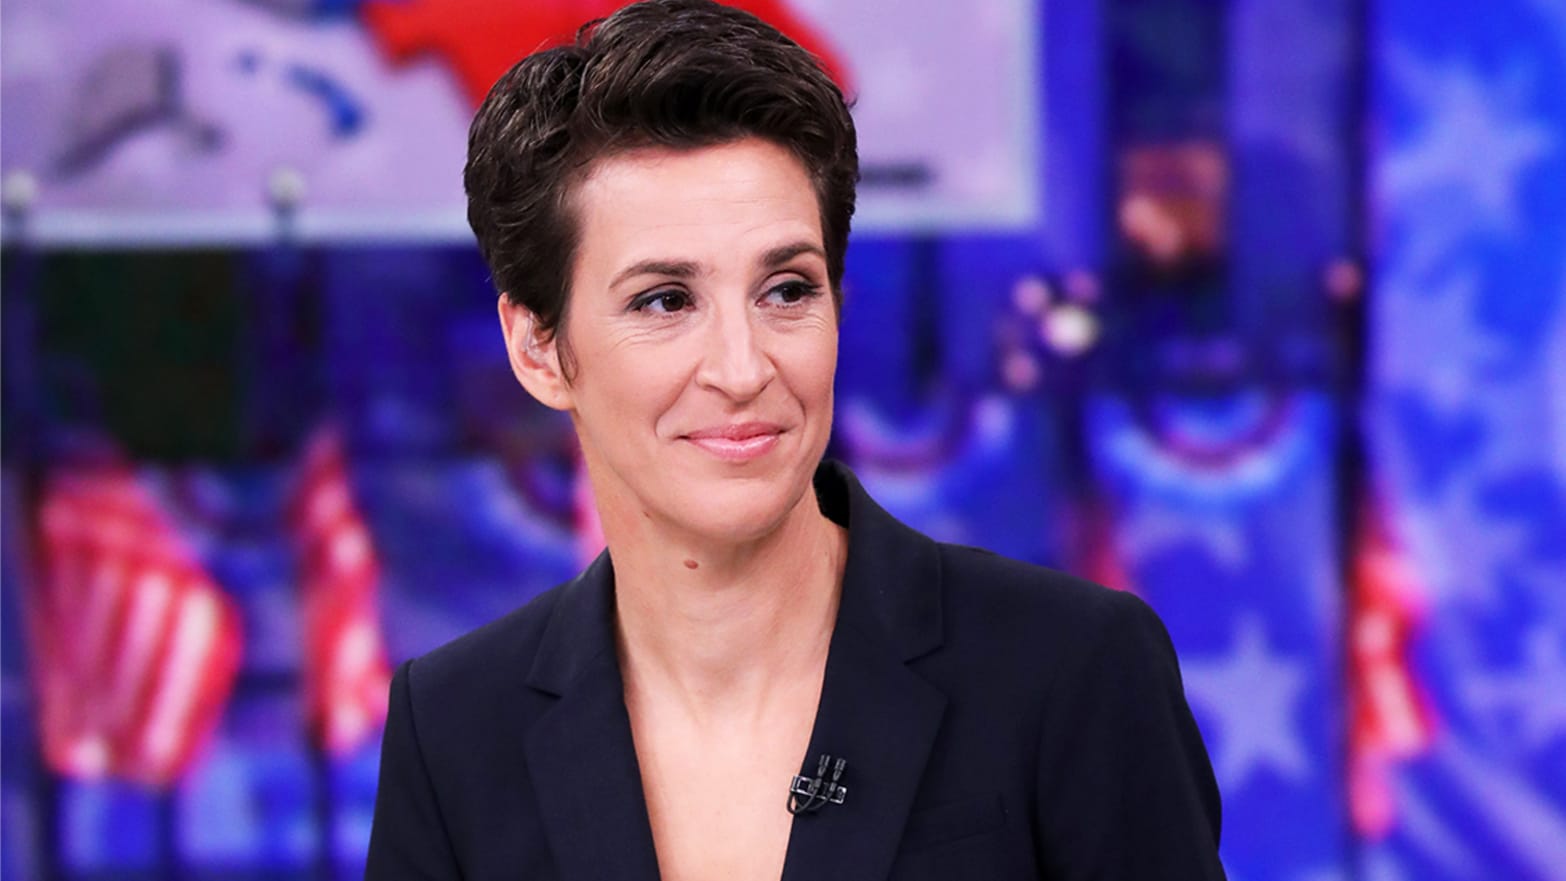 Inside the Massive MSNBC Deal Paying Rachel Maddow to Work Less